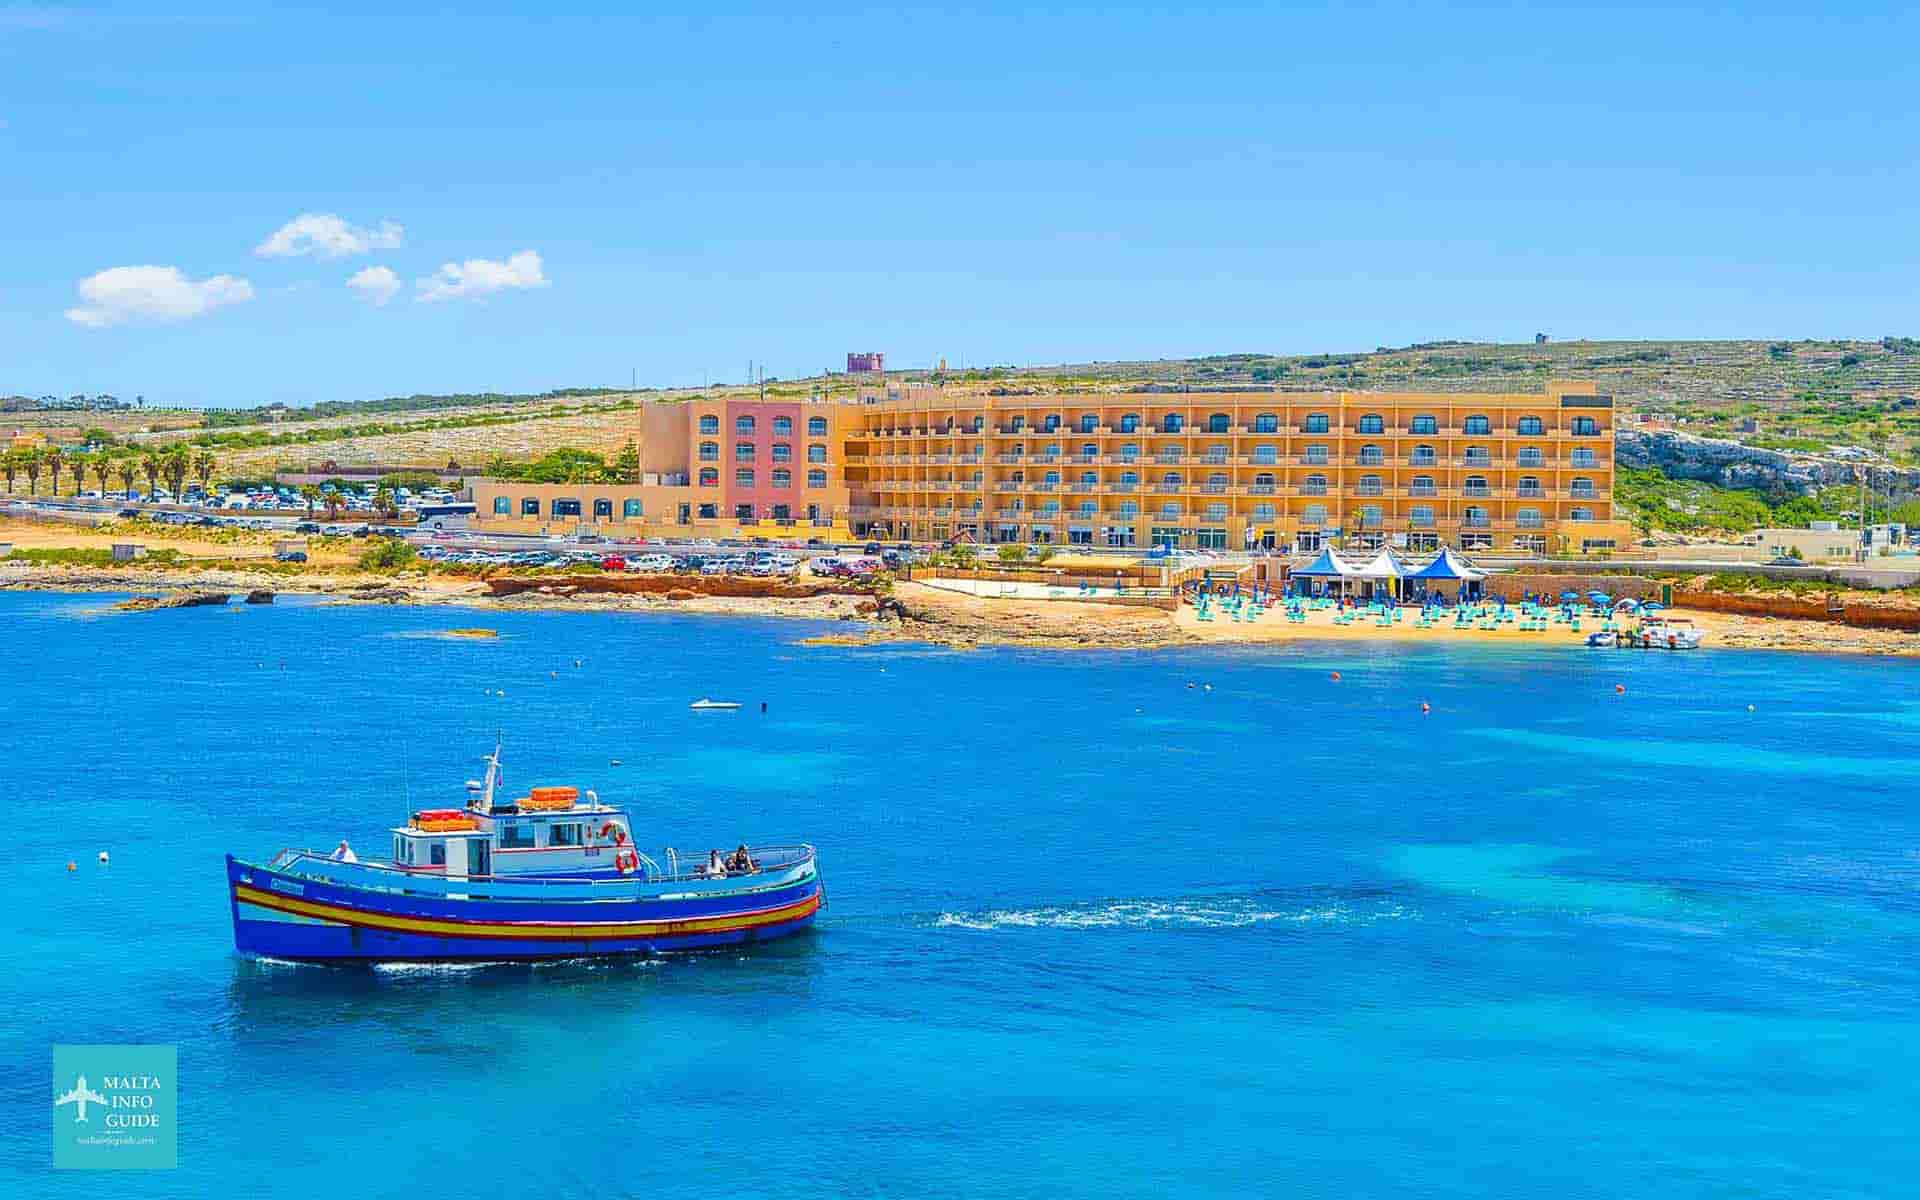 The view of Paradise Bay hotel whilst sailing to Gozo island.